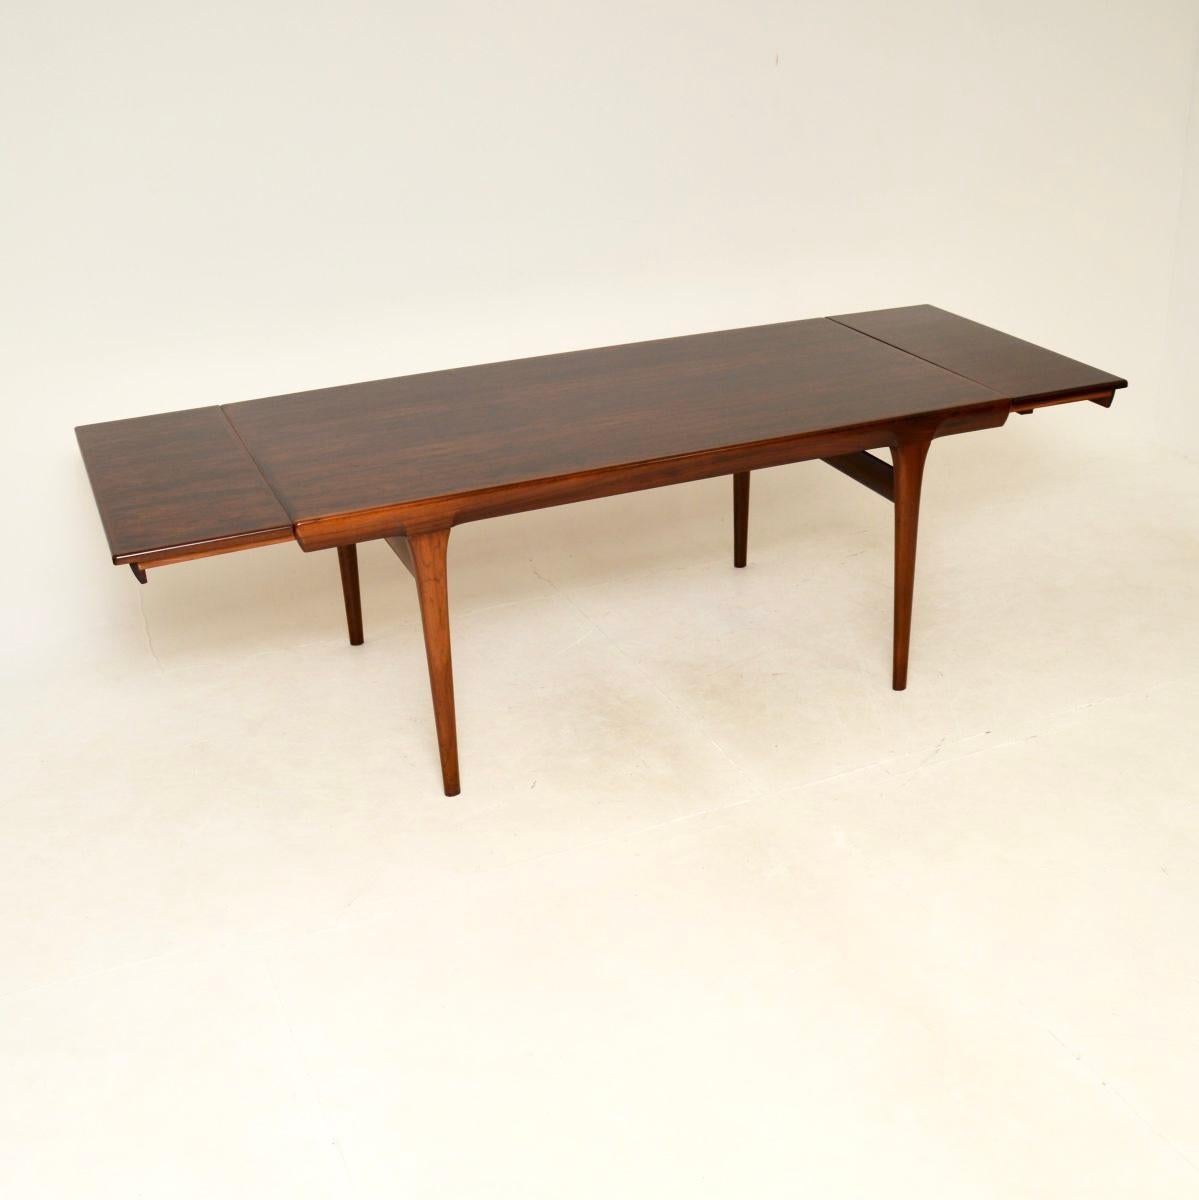 An absolutely stunning Danish vintage extending dining table by IB Kofod Larsen. It was made in Denmark by Faarup, it dates from the 1960’s.

The quality is outstanding, it stand on stylish tapered legs and has a beautifully moulded top edge. There